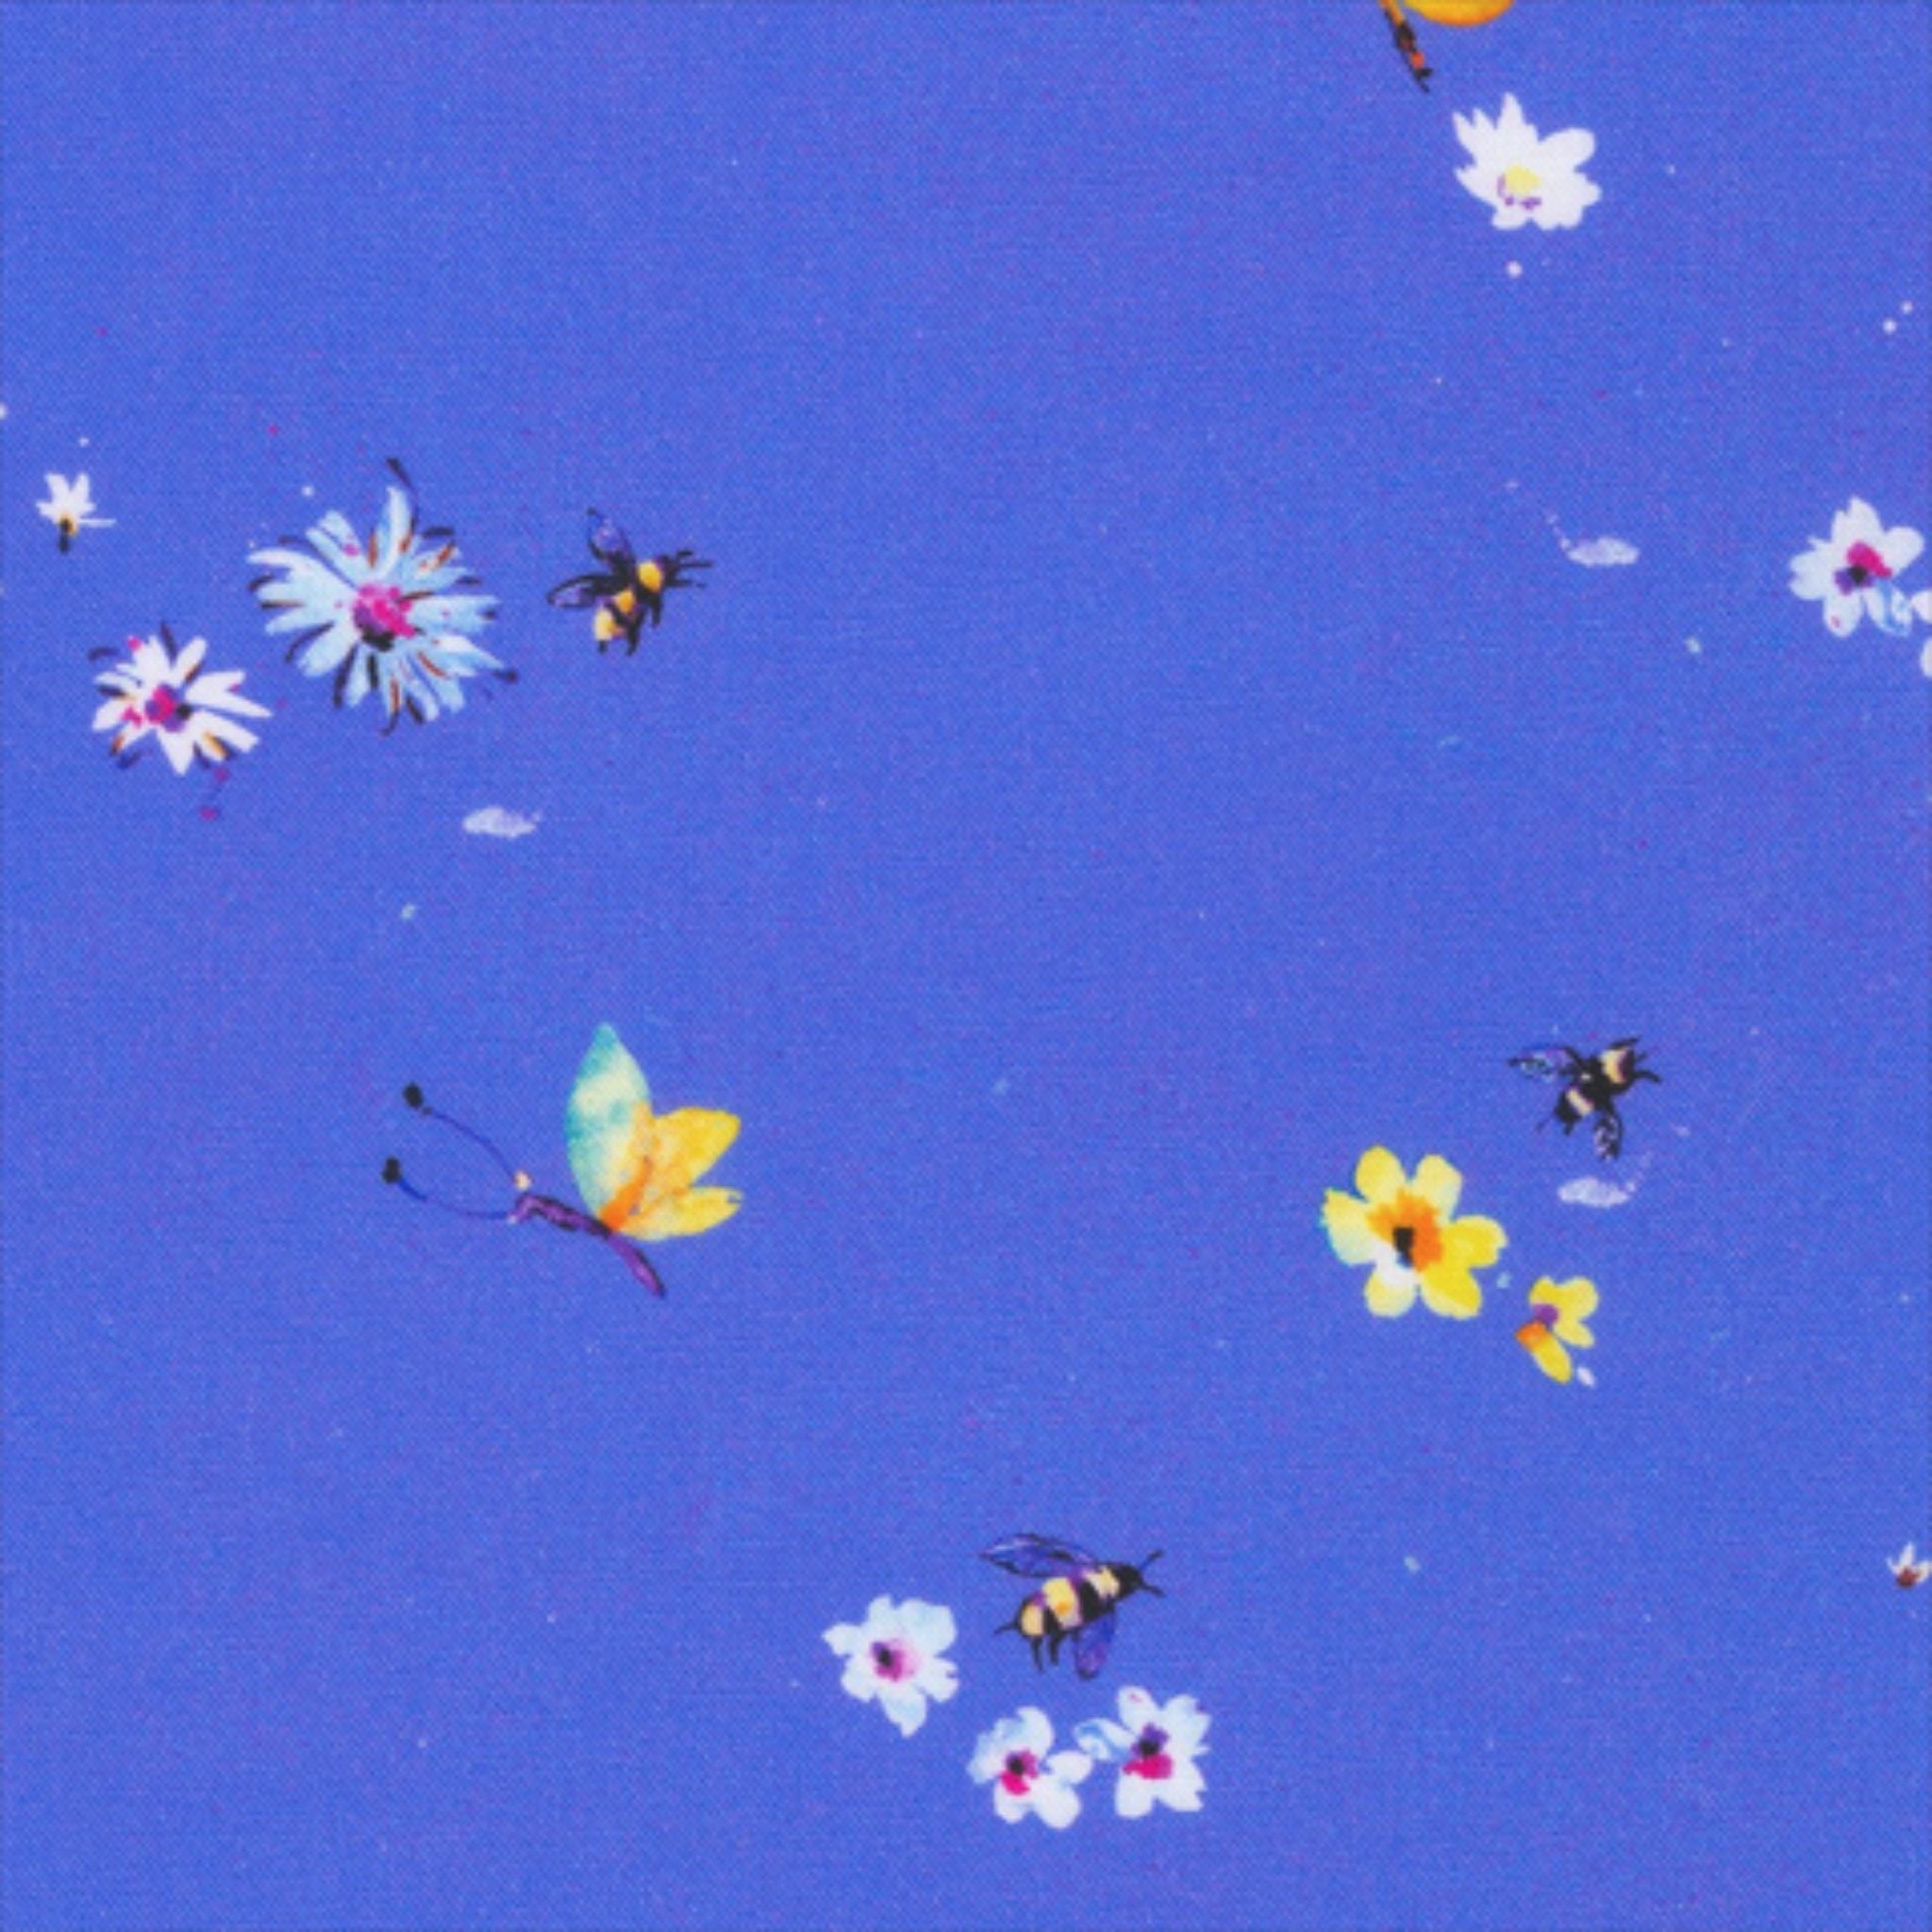 Butterflies, dragonflies and flowers on purple cotton fabric